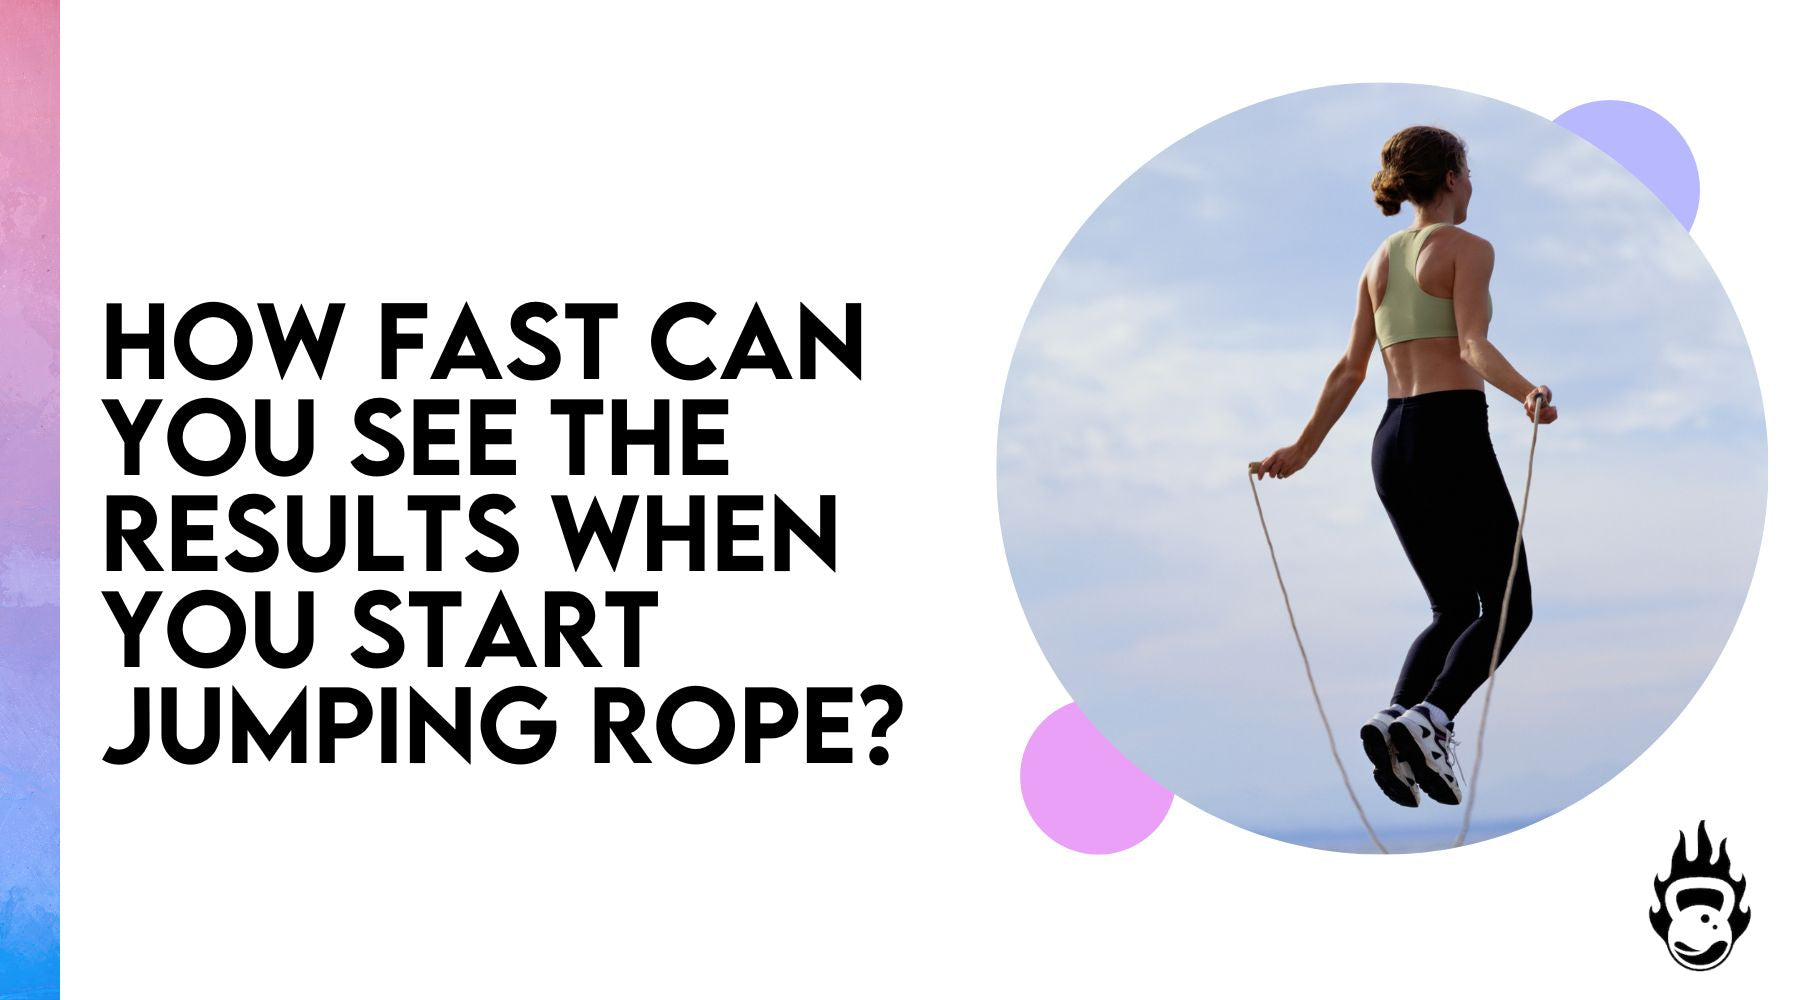 Health Benefits of Jumping Rope: 5 Reasons You Should Jump Rope Every Day